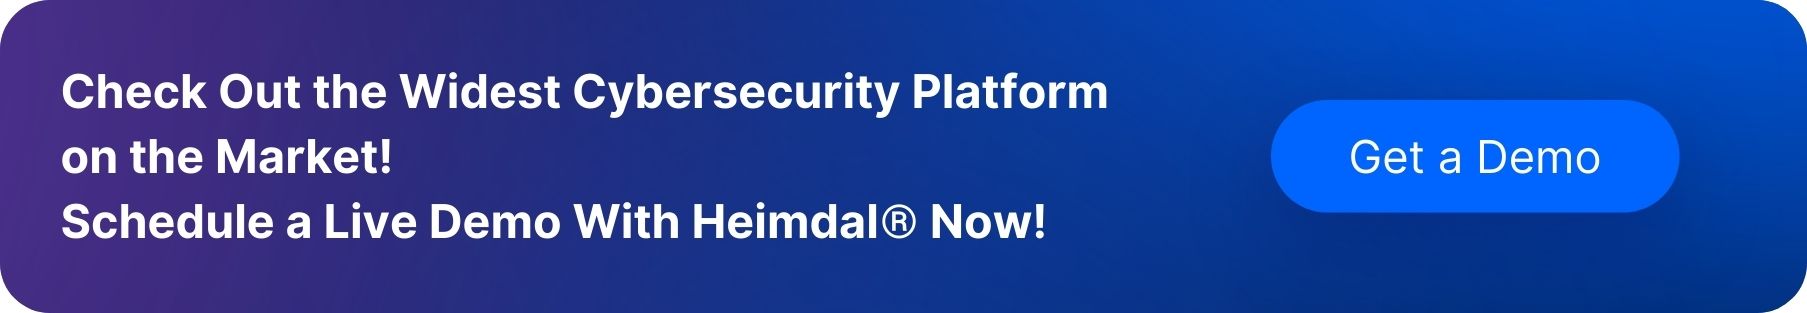 Callout box reading Heimdal is the widest cybersecurity platform on the market.